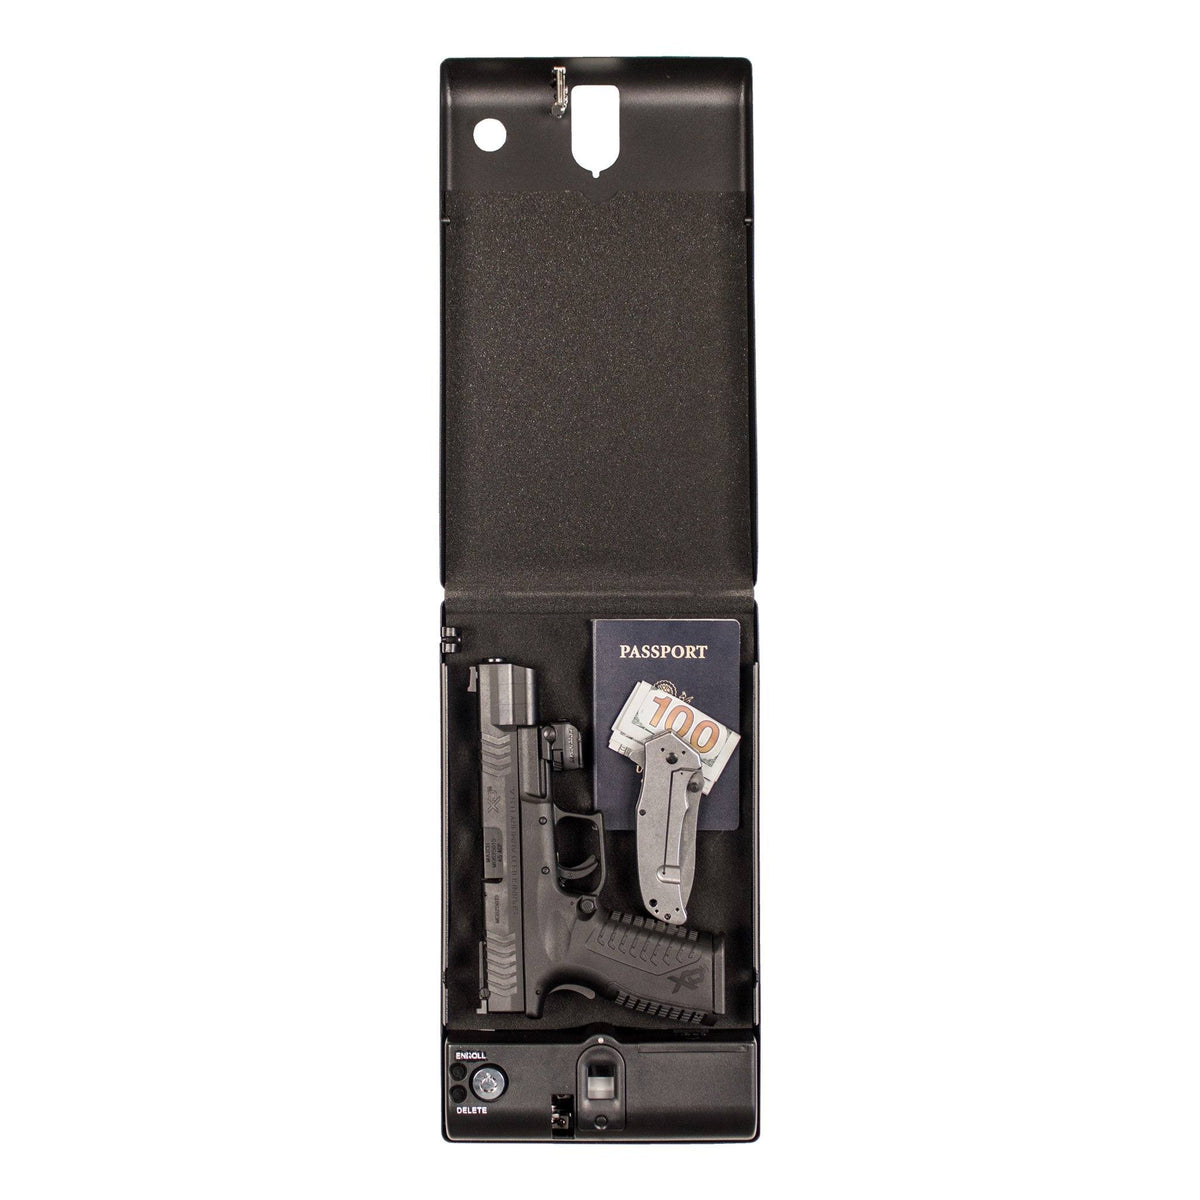 Tracker SPS-04B Small Pistol Safe With Biometric Lock Open with Handgun Knife and Passport